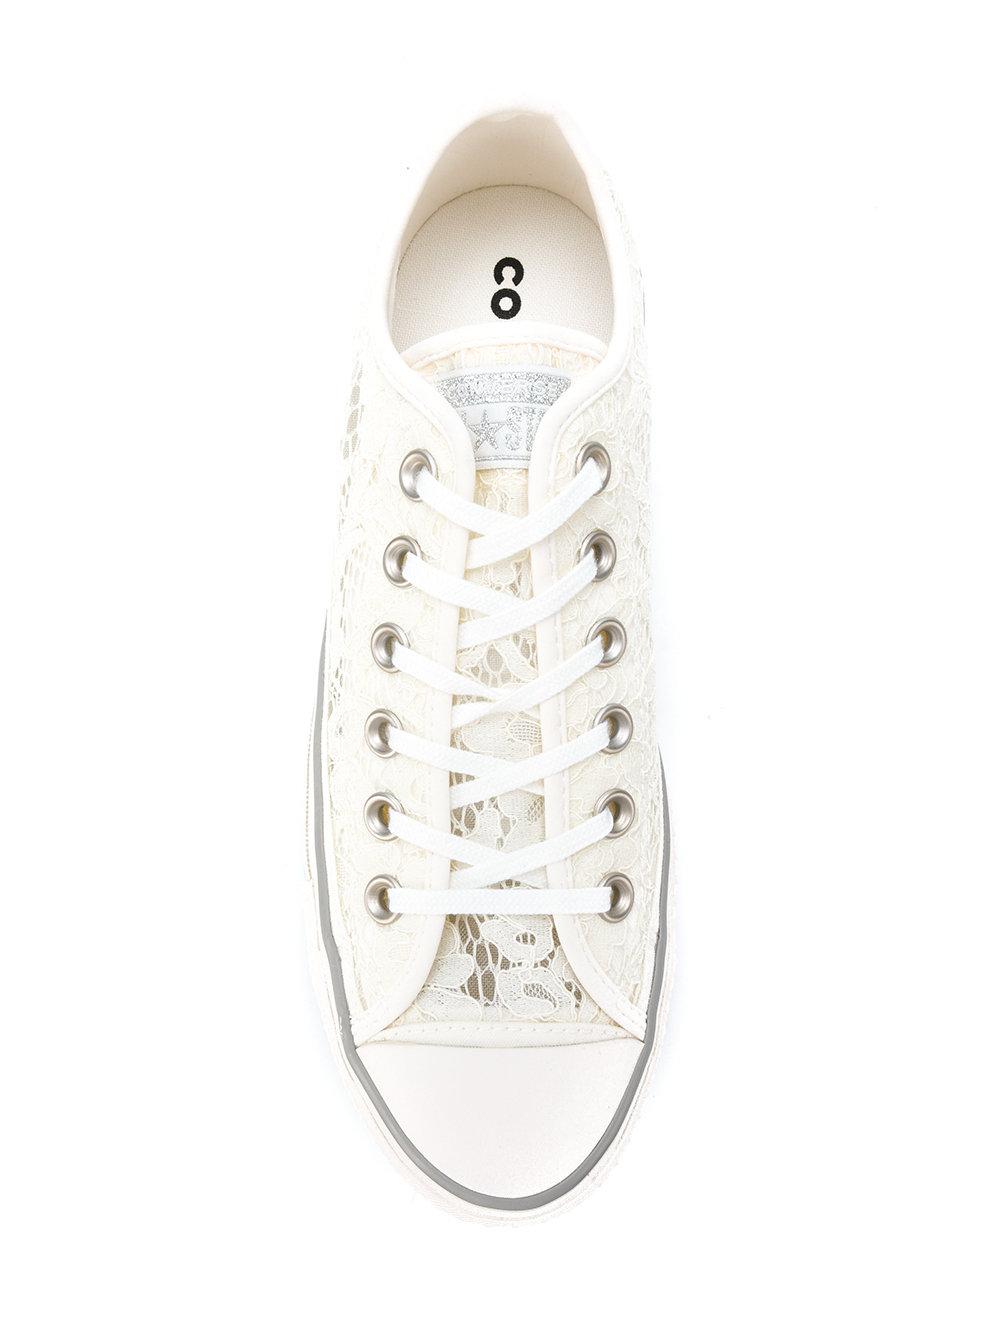 converse basse dentelle blanche, enormous deal UP TO 80% OFF -  simourdesign.com